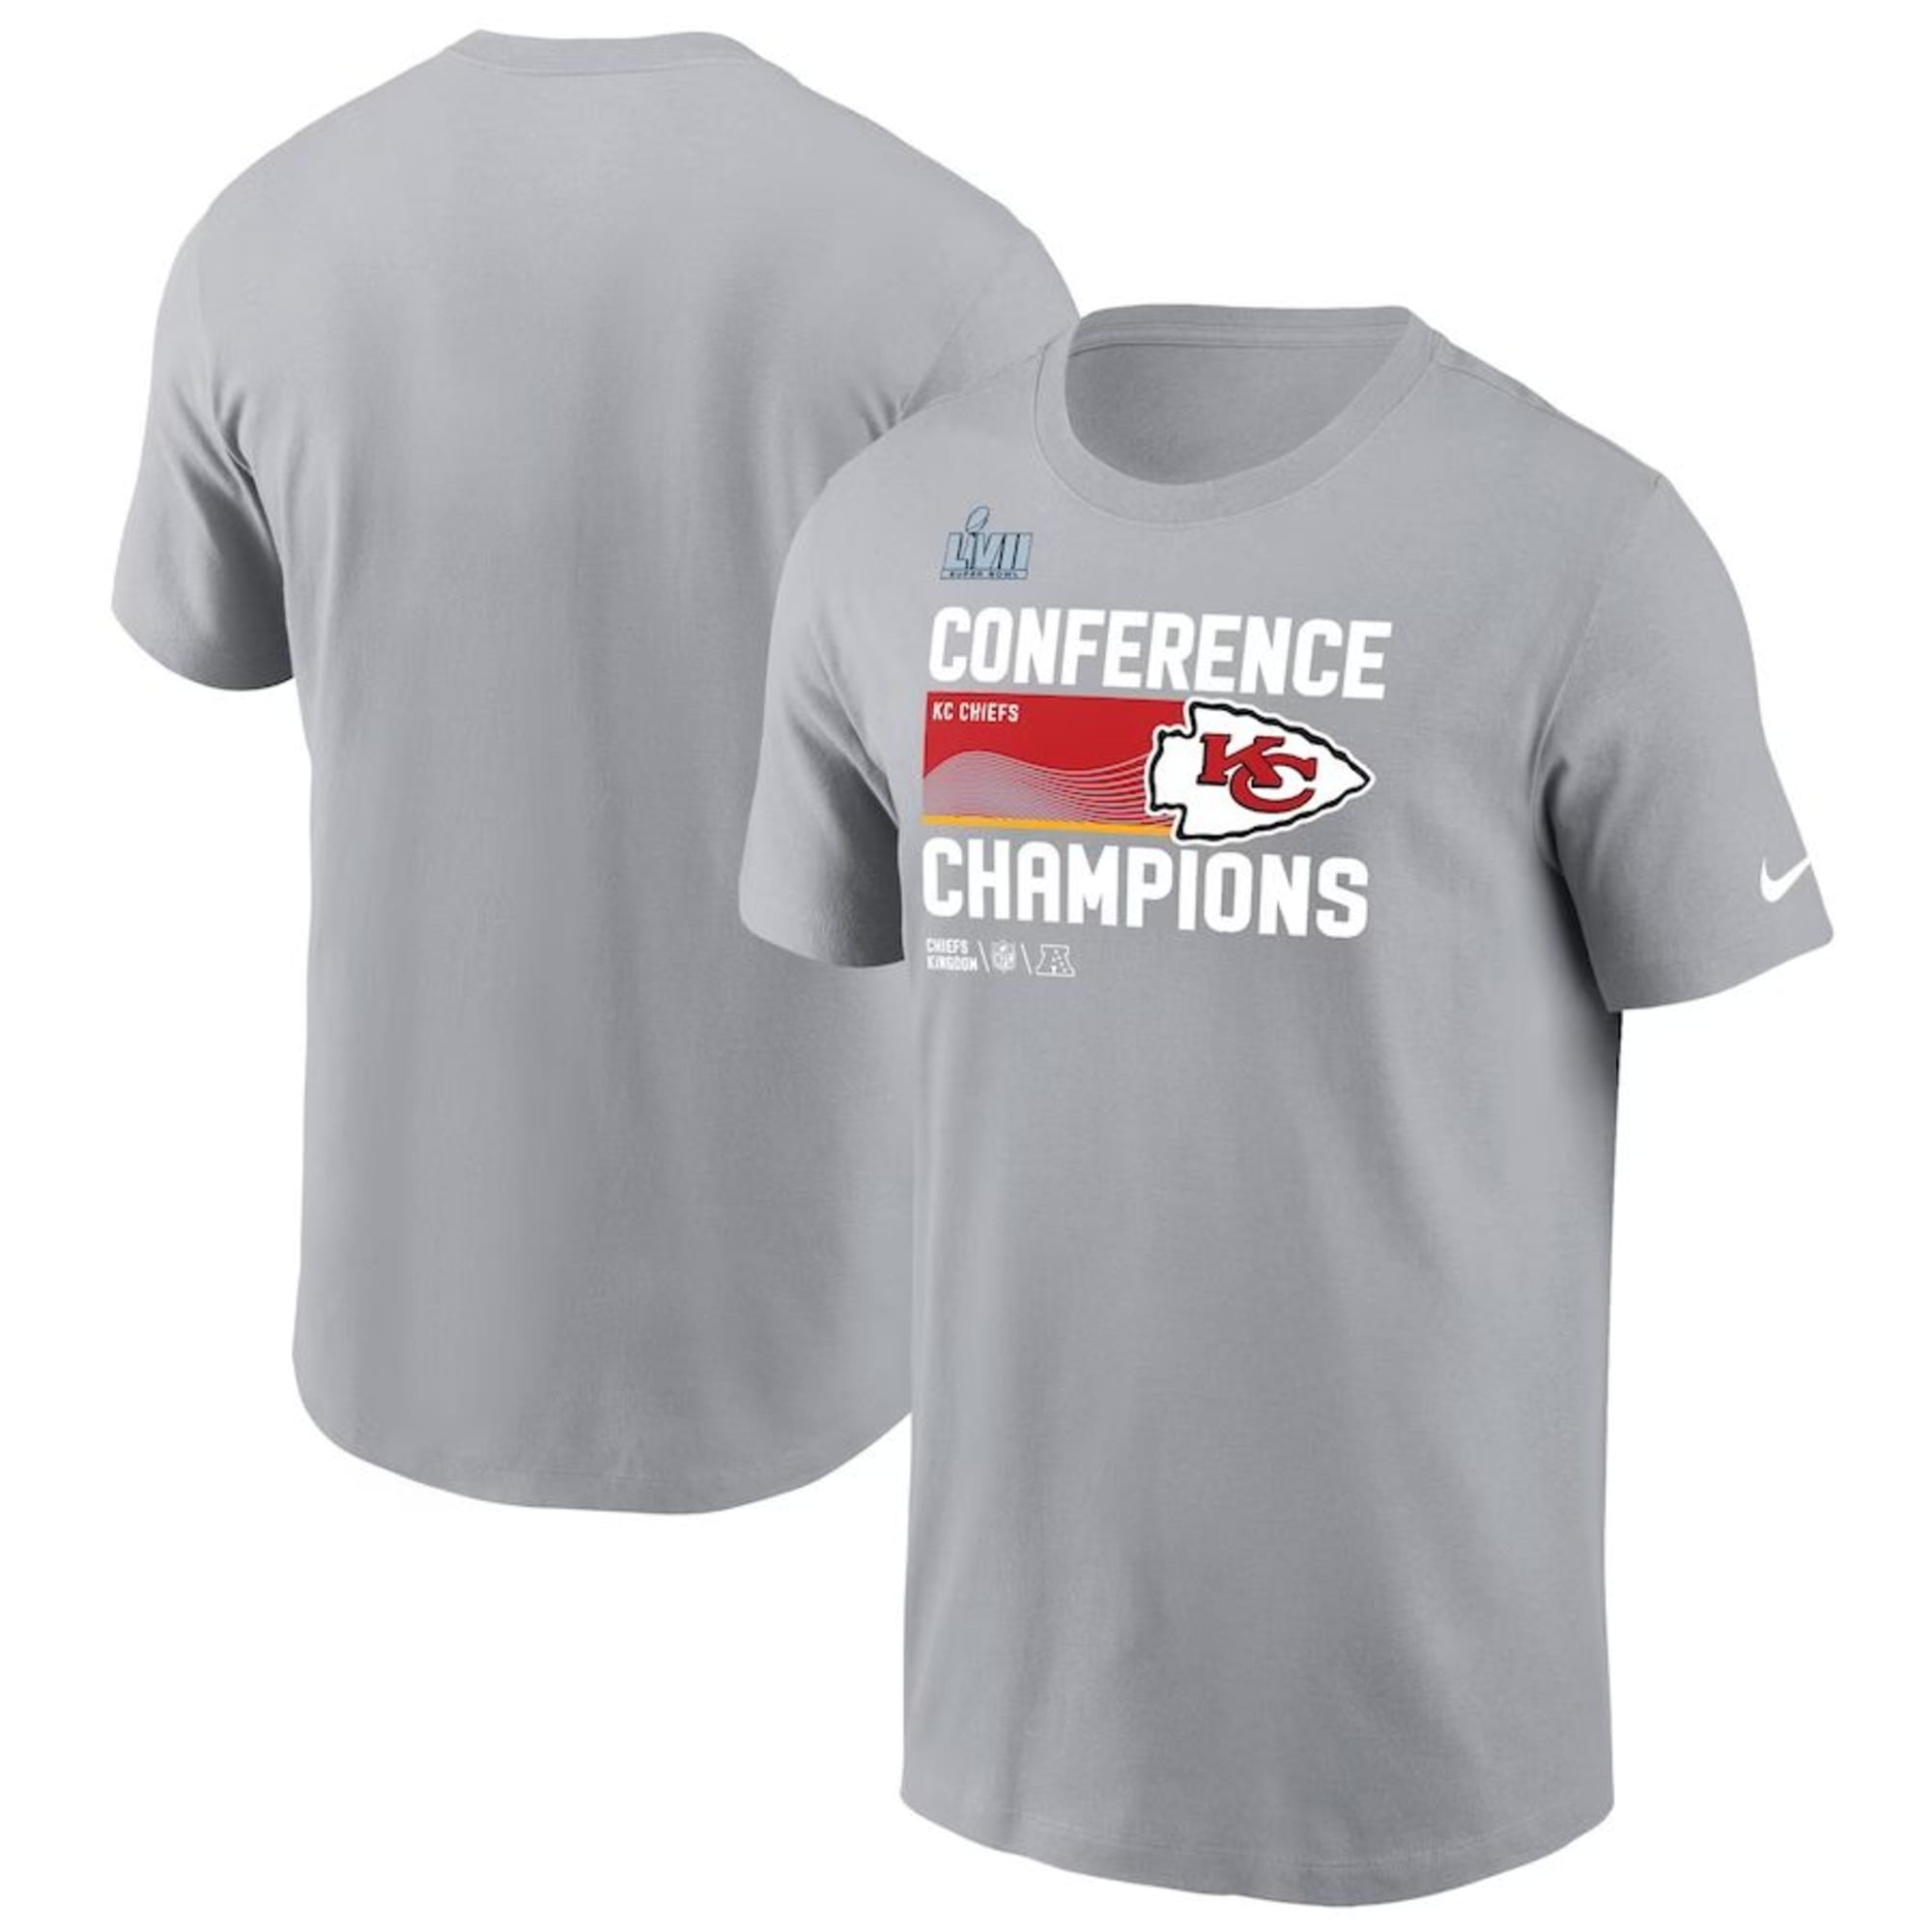 Order your Kansas City Chiefs AFC Champions shirts and memorabilia now ...